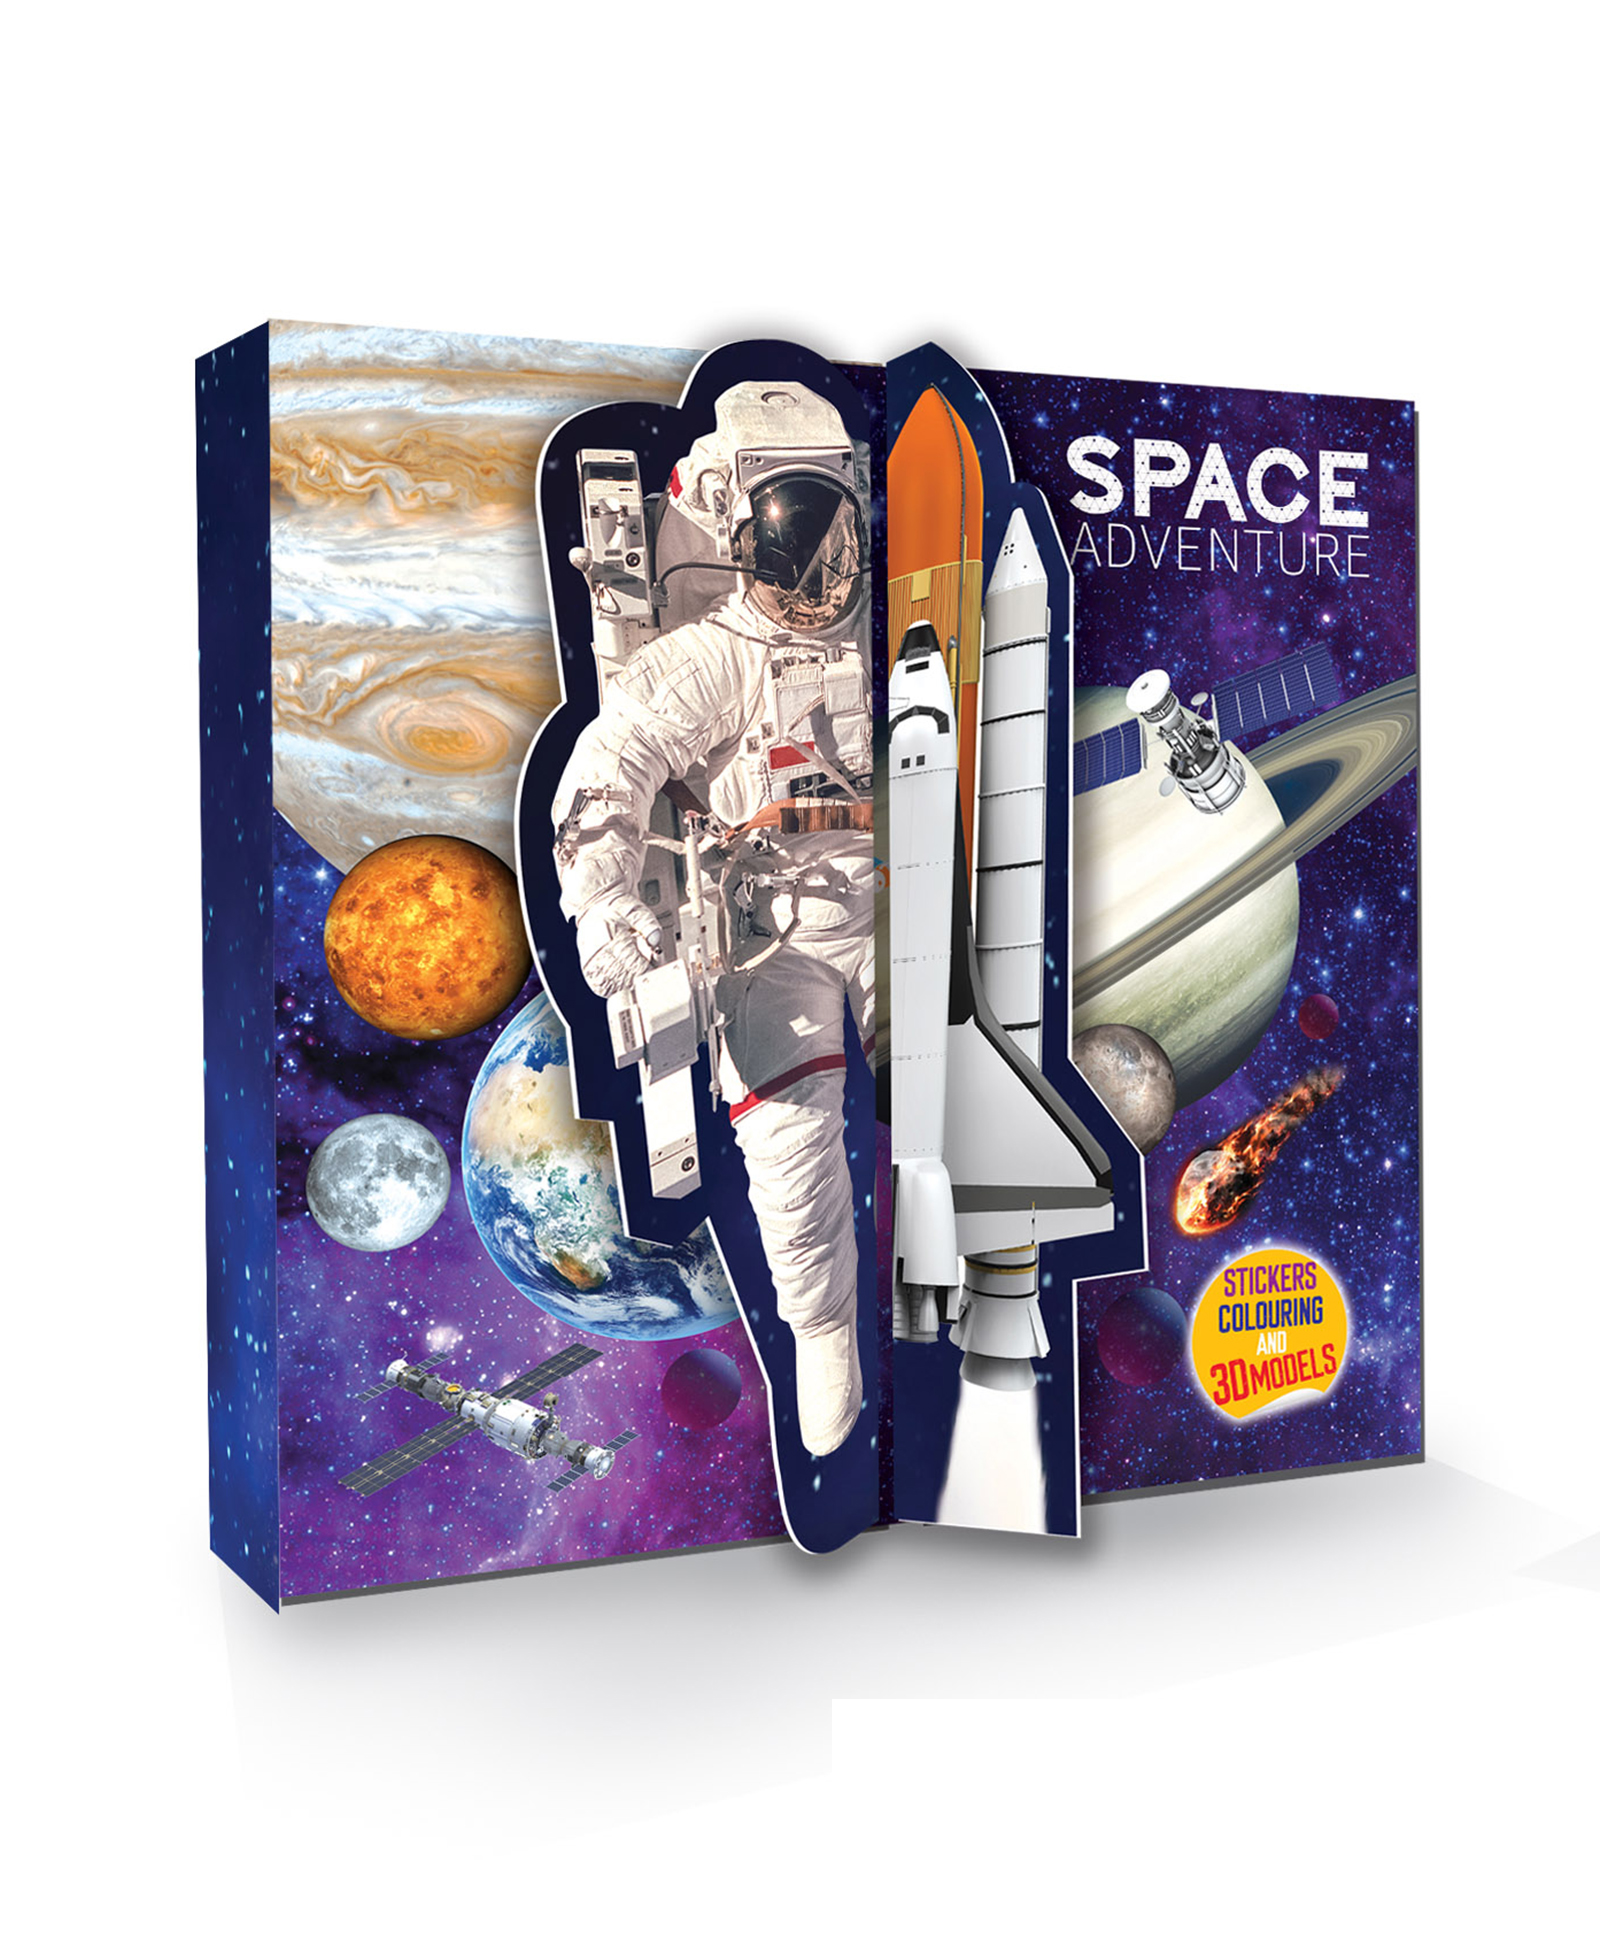 3D Model Kit with Colouring & Sticker Fun to Create Space Adventure Scene and Play